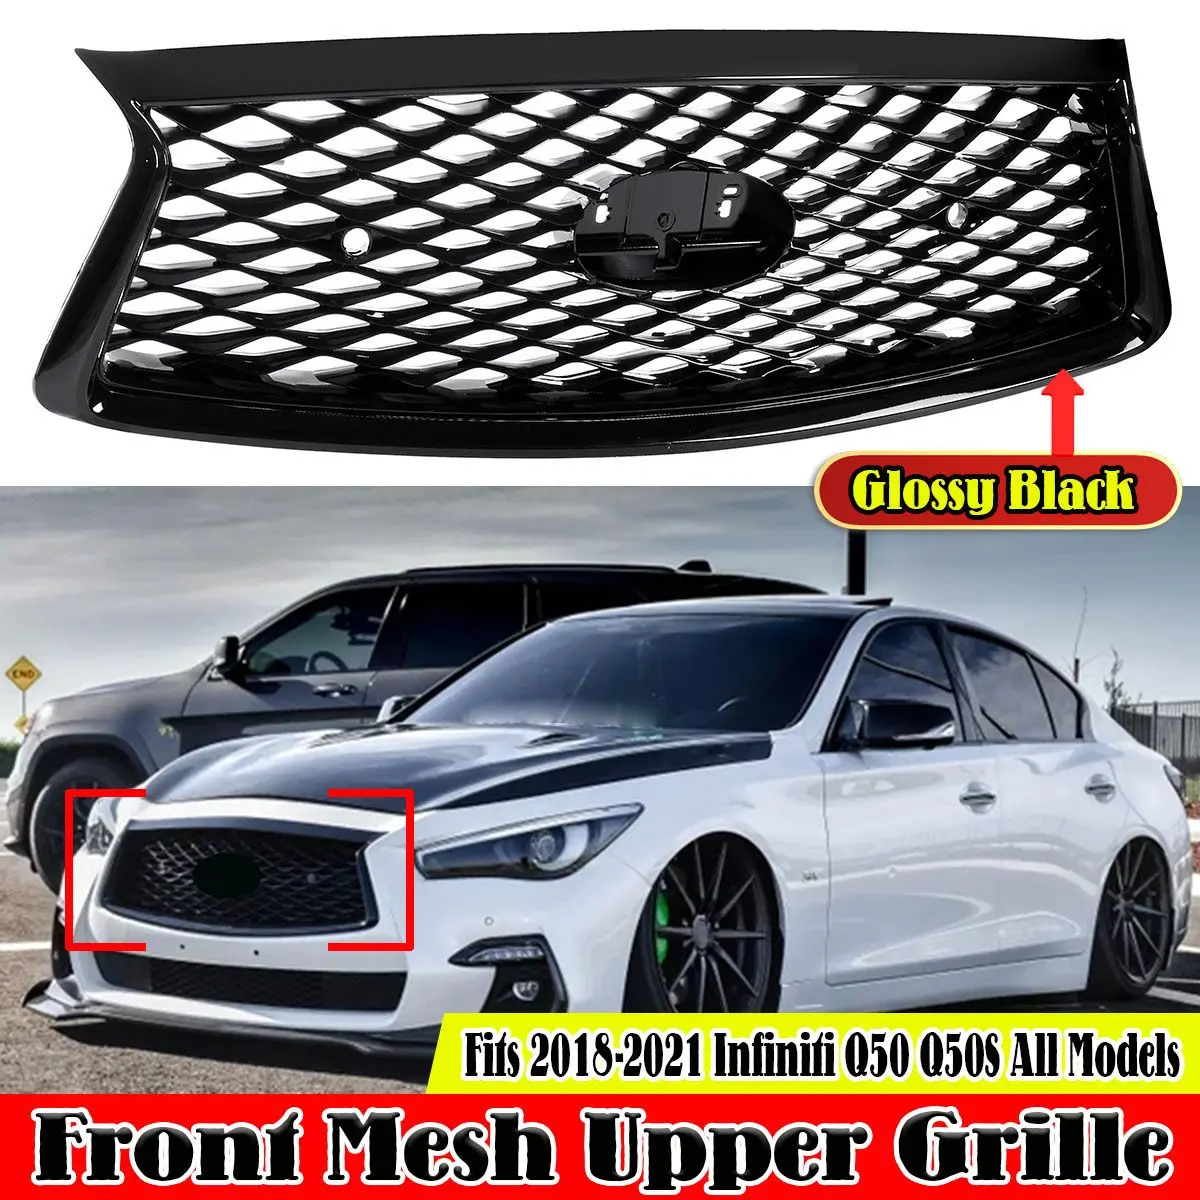 

Glossy Black Car Front Bumper Grille Grill For Infiniti Q50 Q50S 2018-2021 Front Upper Grille Front Grill Mesh Trim Cover